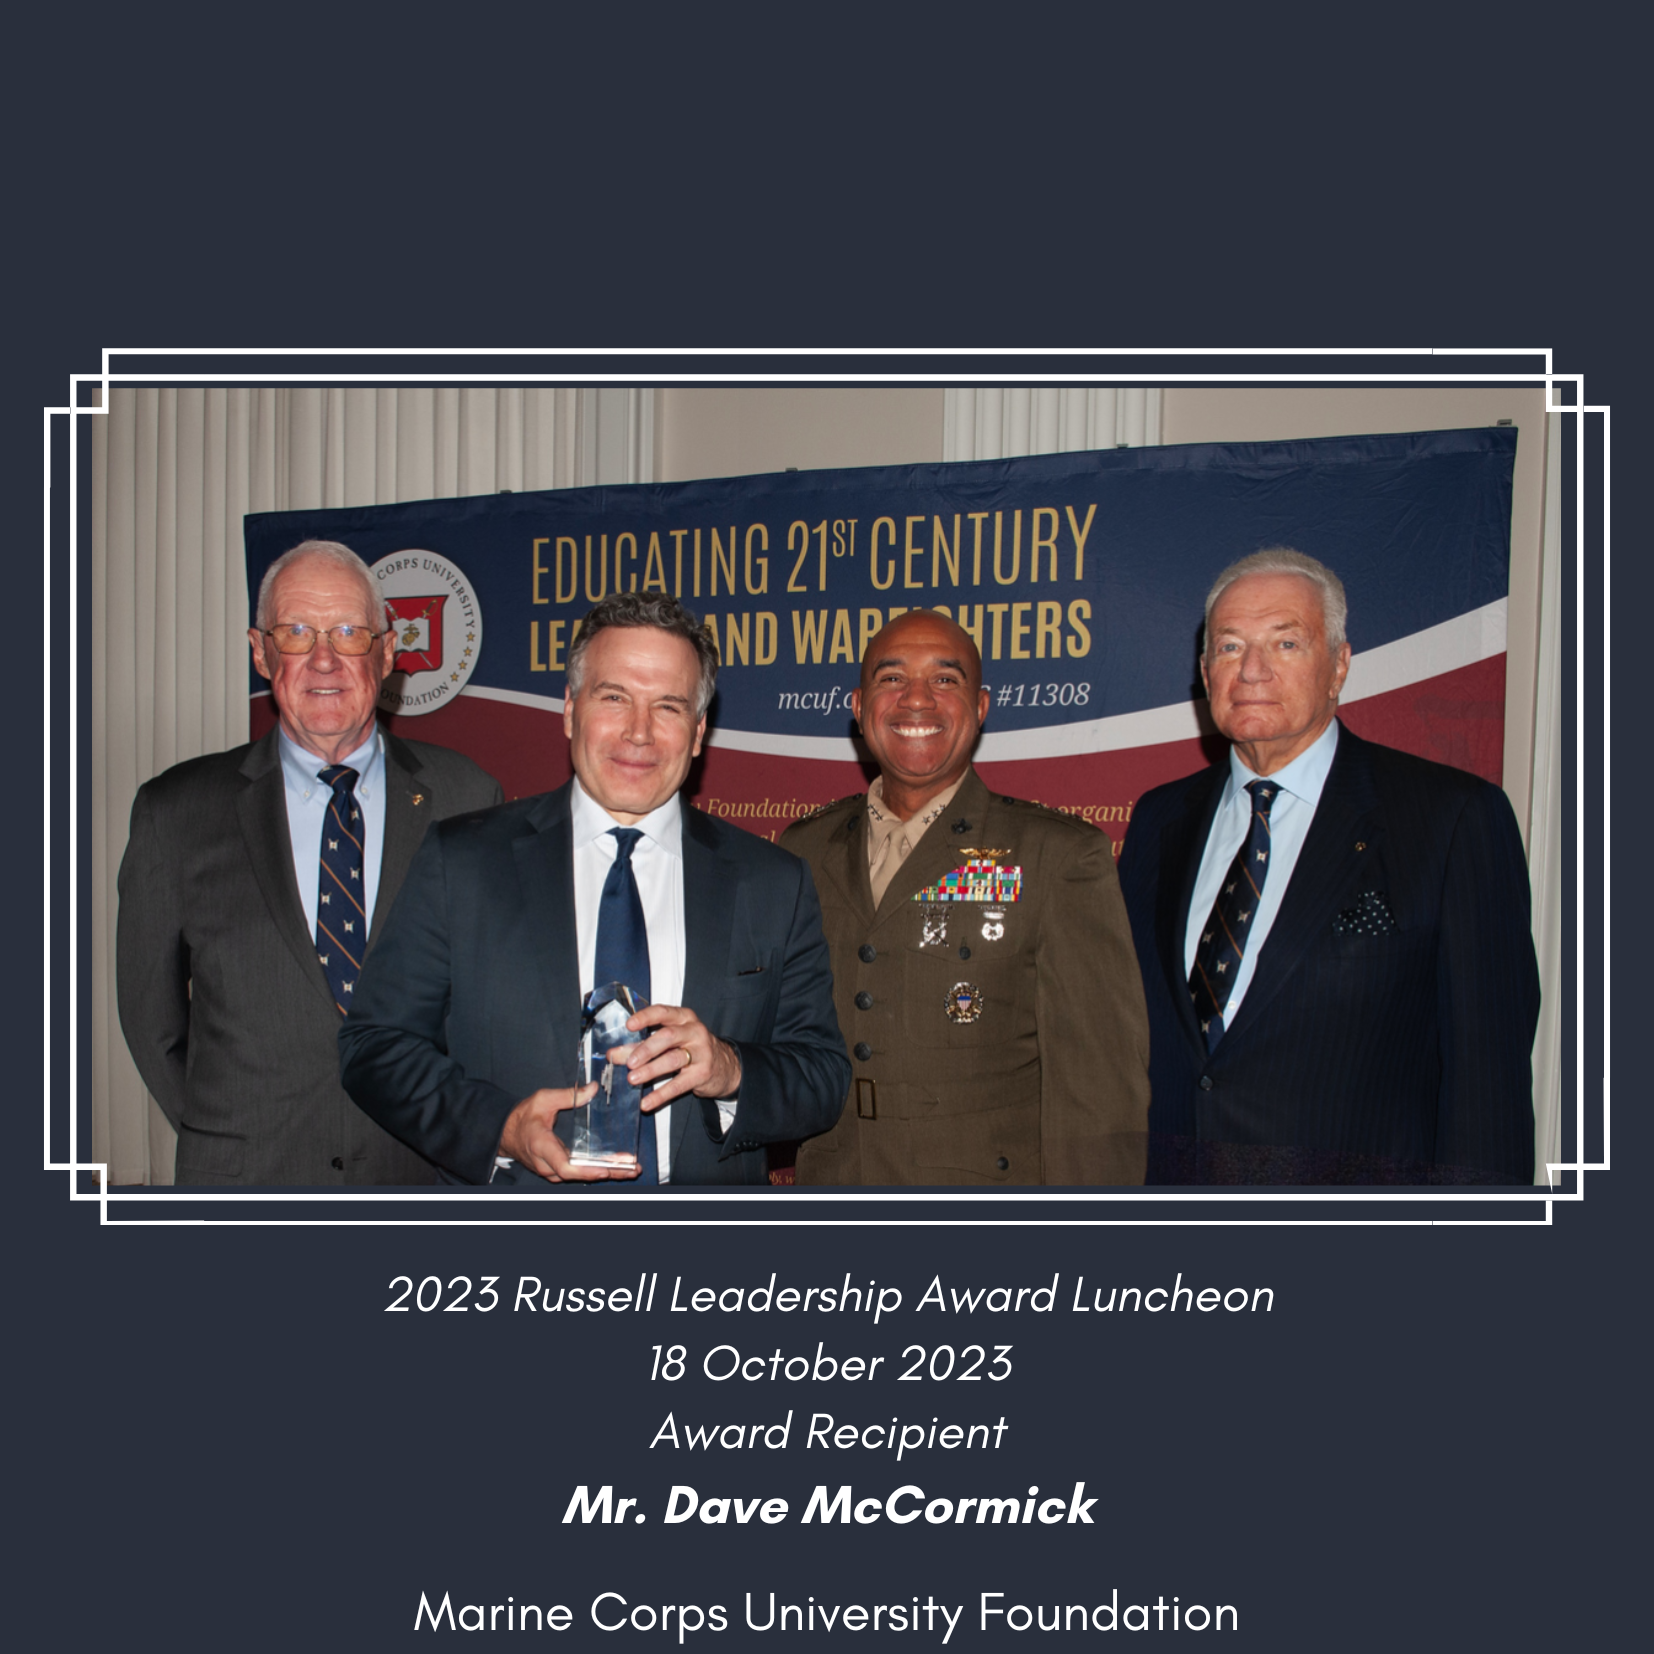 Dave McCormick accepting Russell Leadership Award